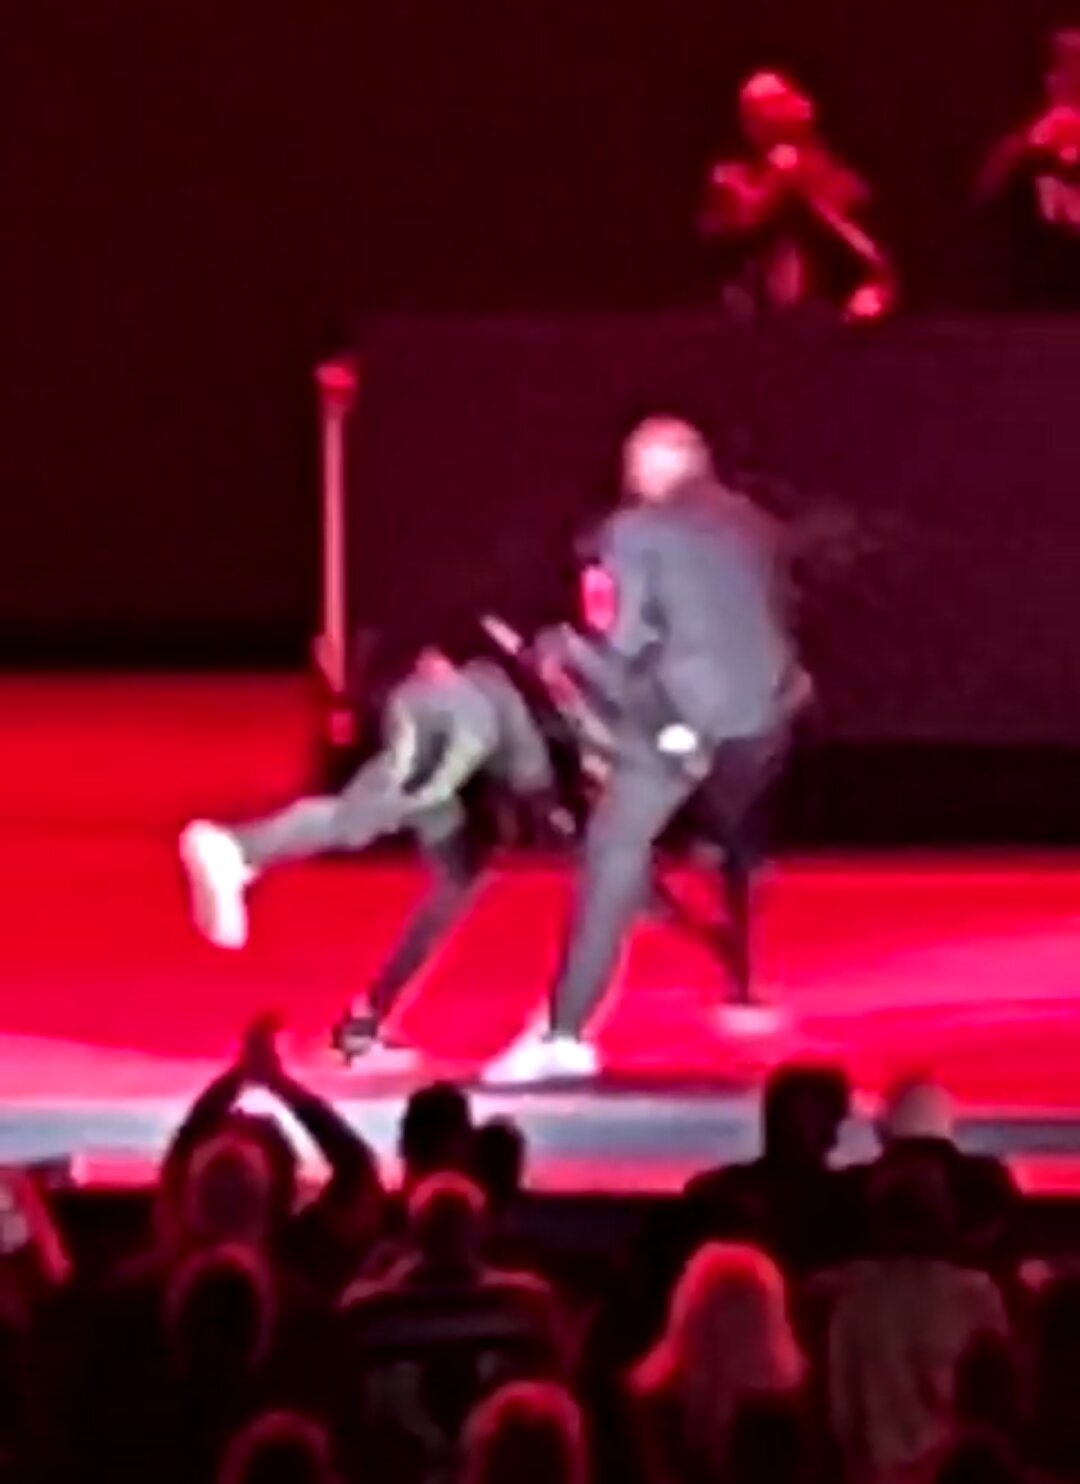  Dave Chappelle Attacked on Stage at Hollywood Bowl (Video)